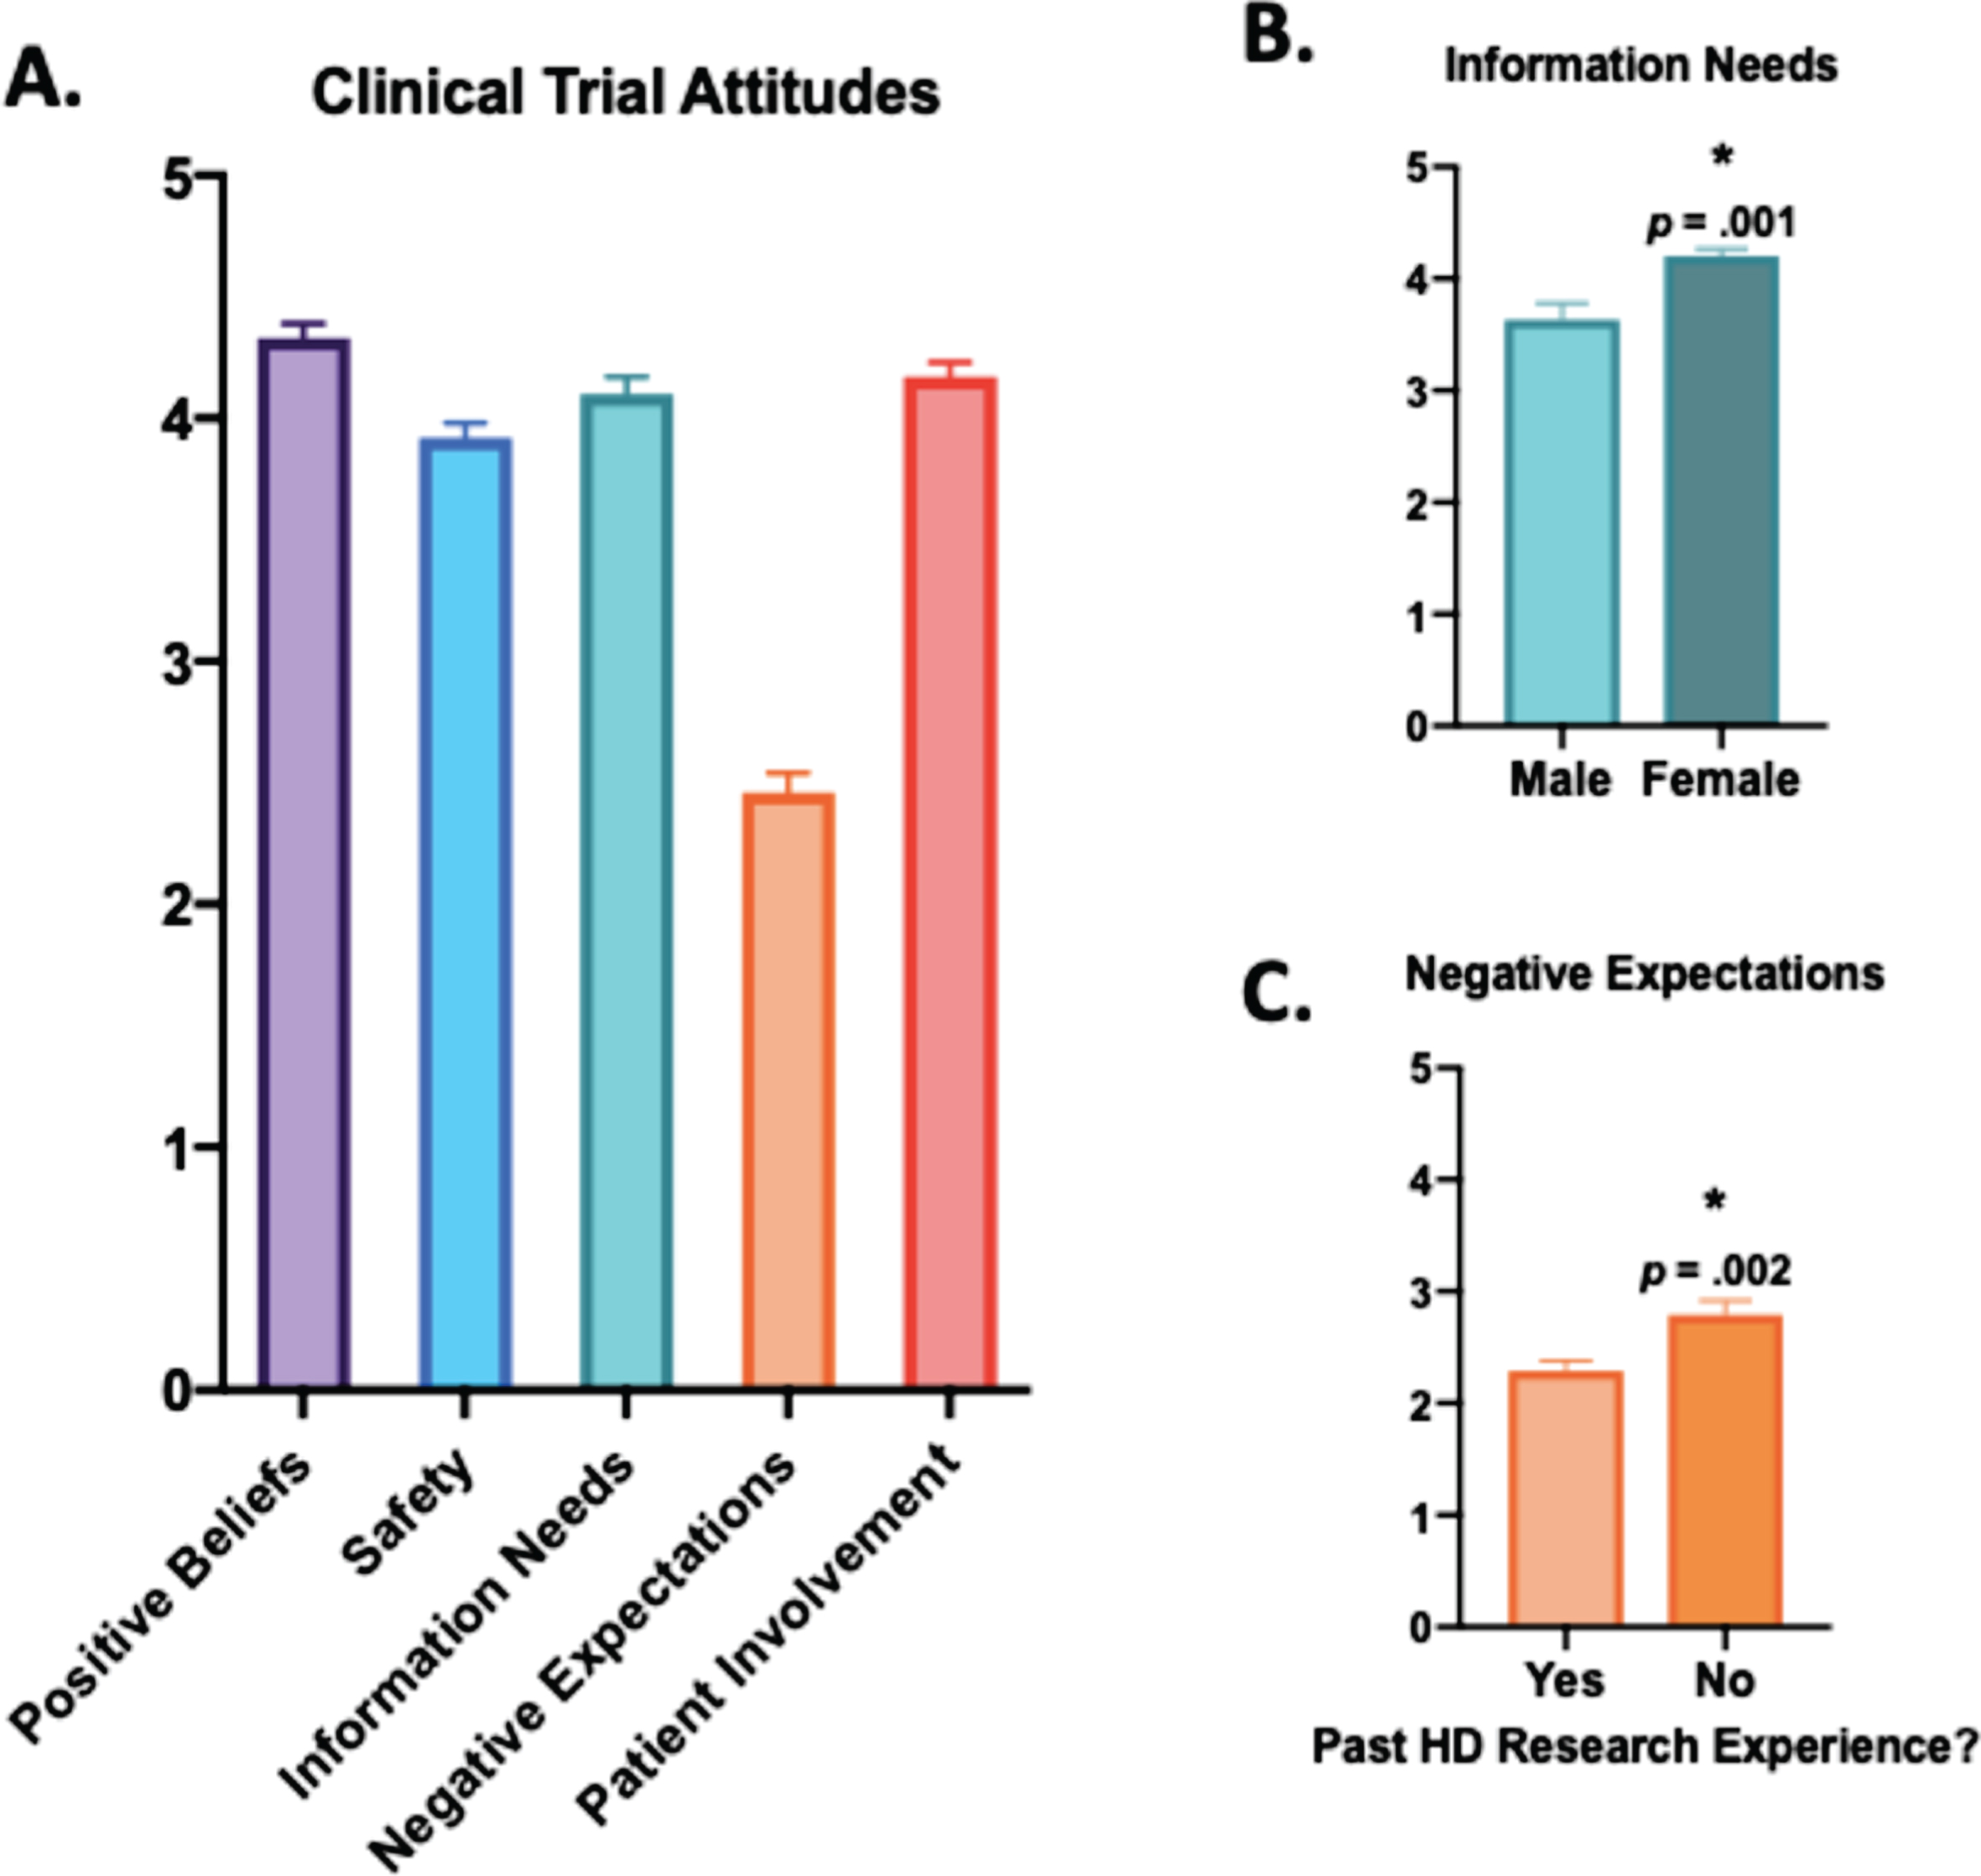 Attitudes toward hypothetical clinical trials in the HD community. A) The PACT 22 Clinical Trial Attitudes scale included 22 statements organized into five subscales: Positive Beliefs, Safety, Information Needs, Negative Expectations, and Patient Involvement [25]. Respondents were asked to rate their agreement with each statement on a five-point Likert scale, ranging from 1 = Strongly Disagree to 5 = Strongly Agree. Subscale scores were calculated via the means of each statement within the specific subscale. Comparisons between groups were made using a Student’s t test or one-way ANOVA. B) Females had higher information needs surrounding clinical trial participation (M = 4.20, SD = 0.53) than males (M = 3.63, SD = 0.55); t(71) = 3.40, p = 0.001. C) Individuals with past HD research participation were less likely to have negative expectations about trial participation (M = 2.29, SD = 0.62) than those without past research experience (M = 2.79, SD = 0.67); t(71) = 3.16, p = 0.002. The graphs shows average subscale scores±standard error of the mean (SEM).